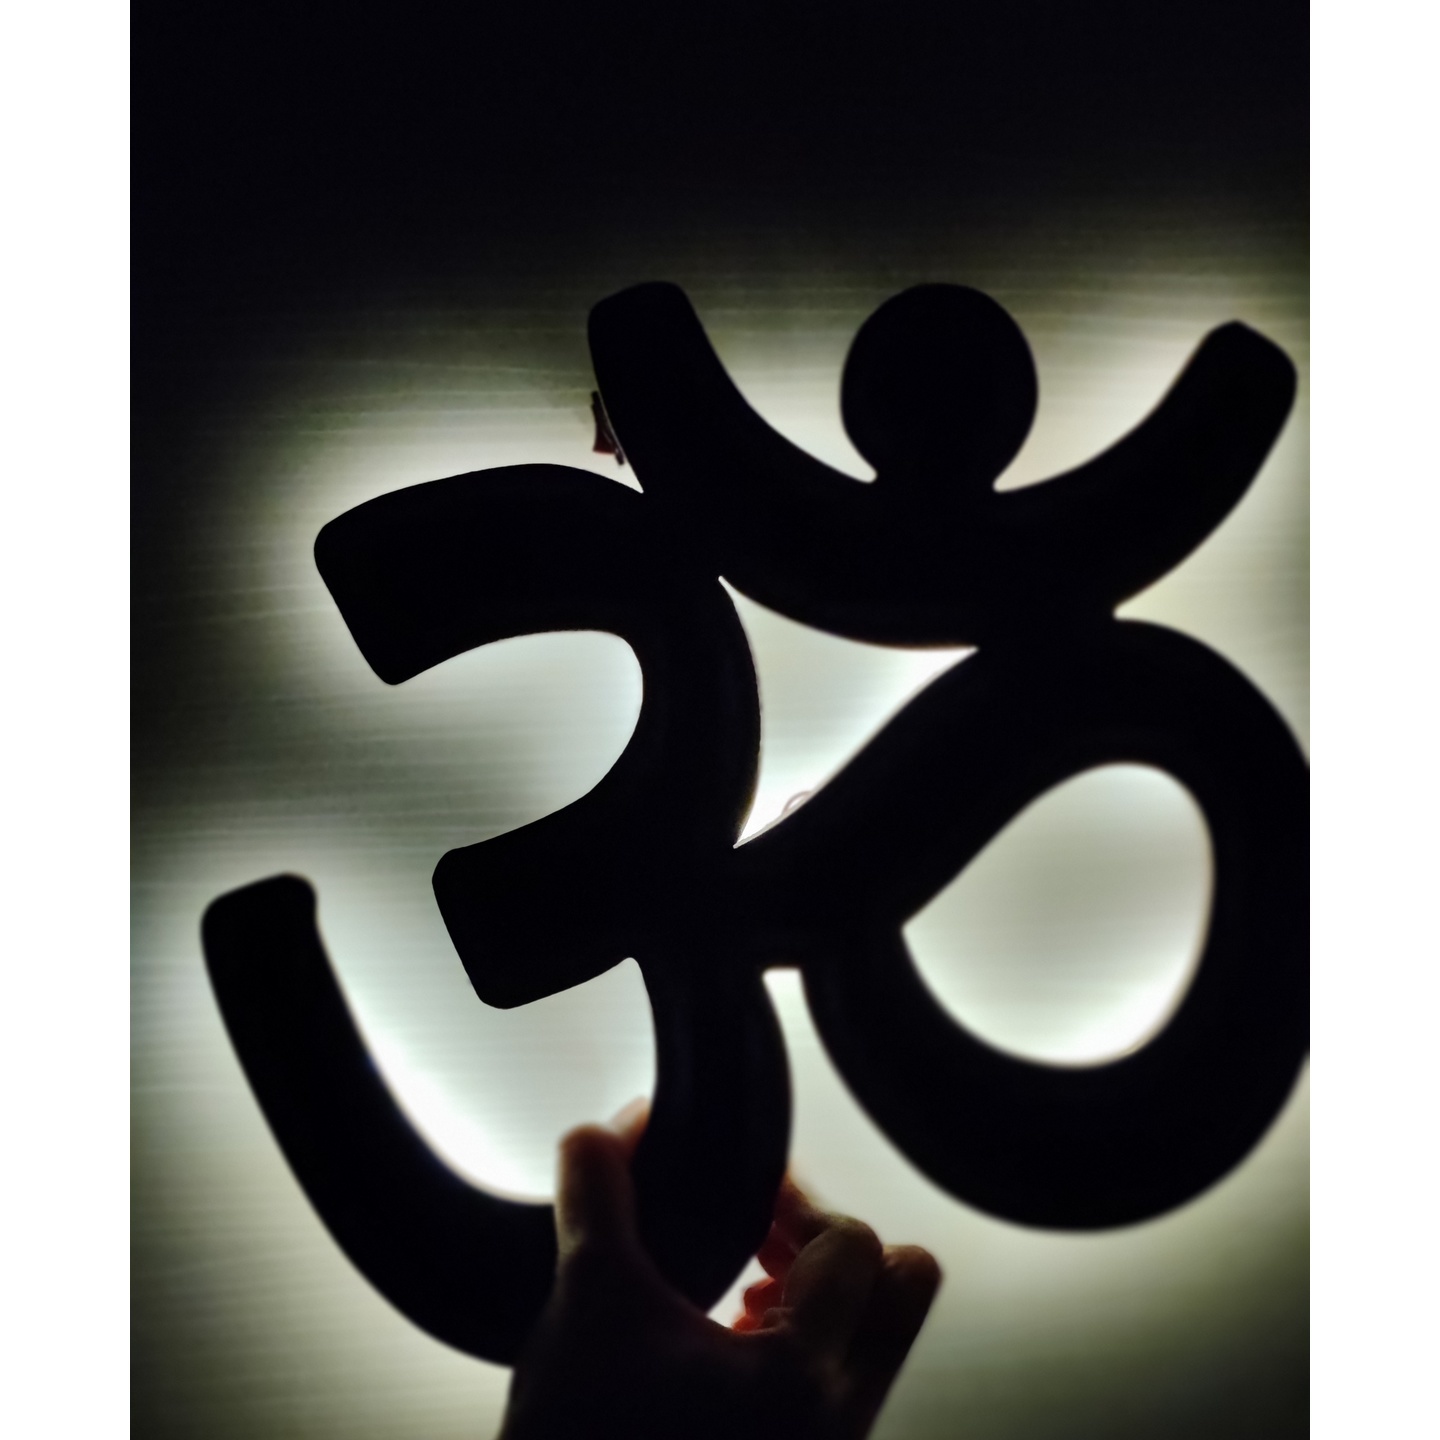 OM Led Wooden Cut out ( Size 10x10 Inches, Wooden , Led )